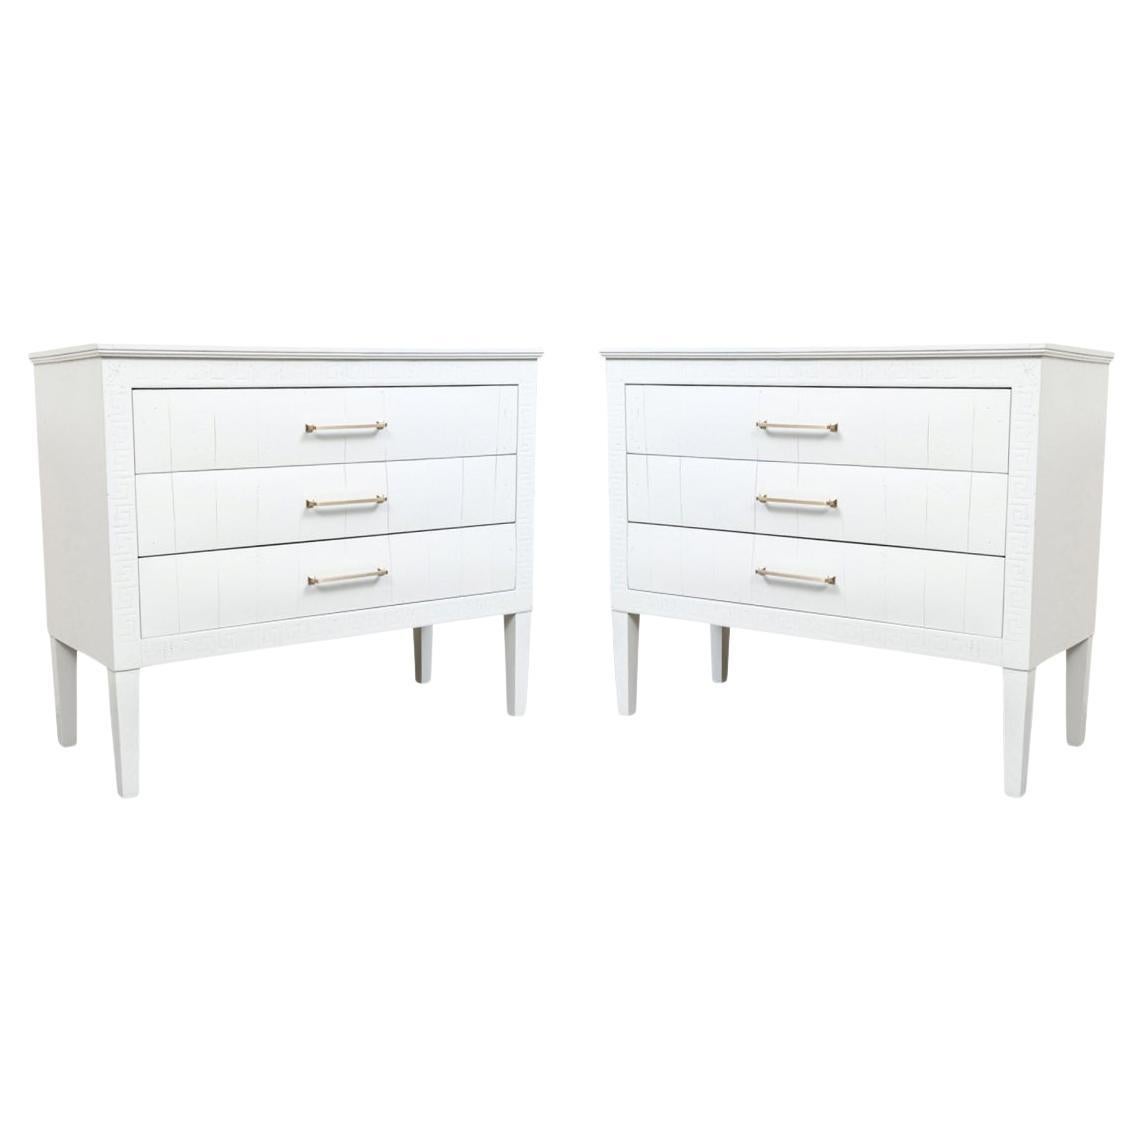 Pair Of Kreiss Furniture Light Grey Paint Decorated Credenzas